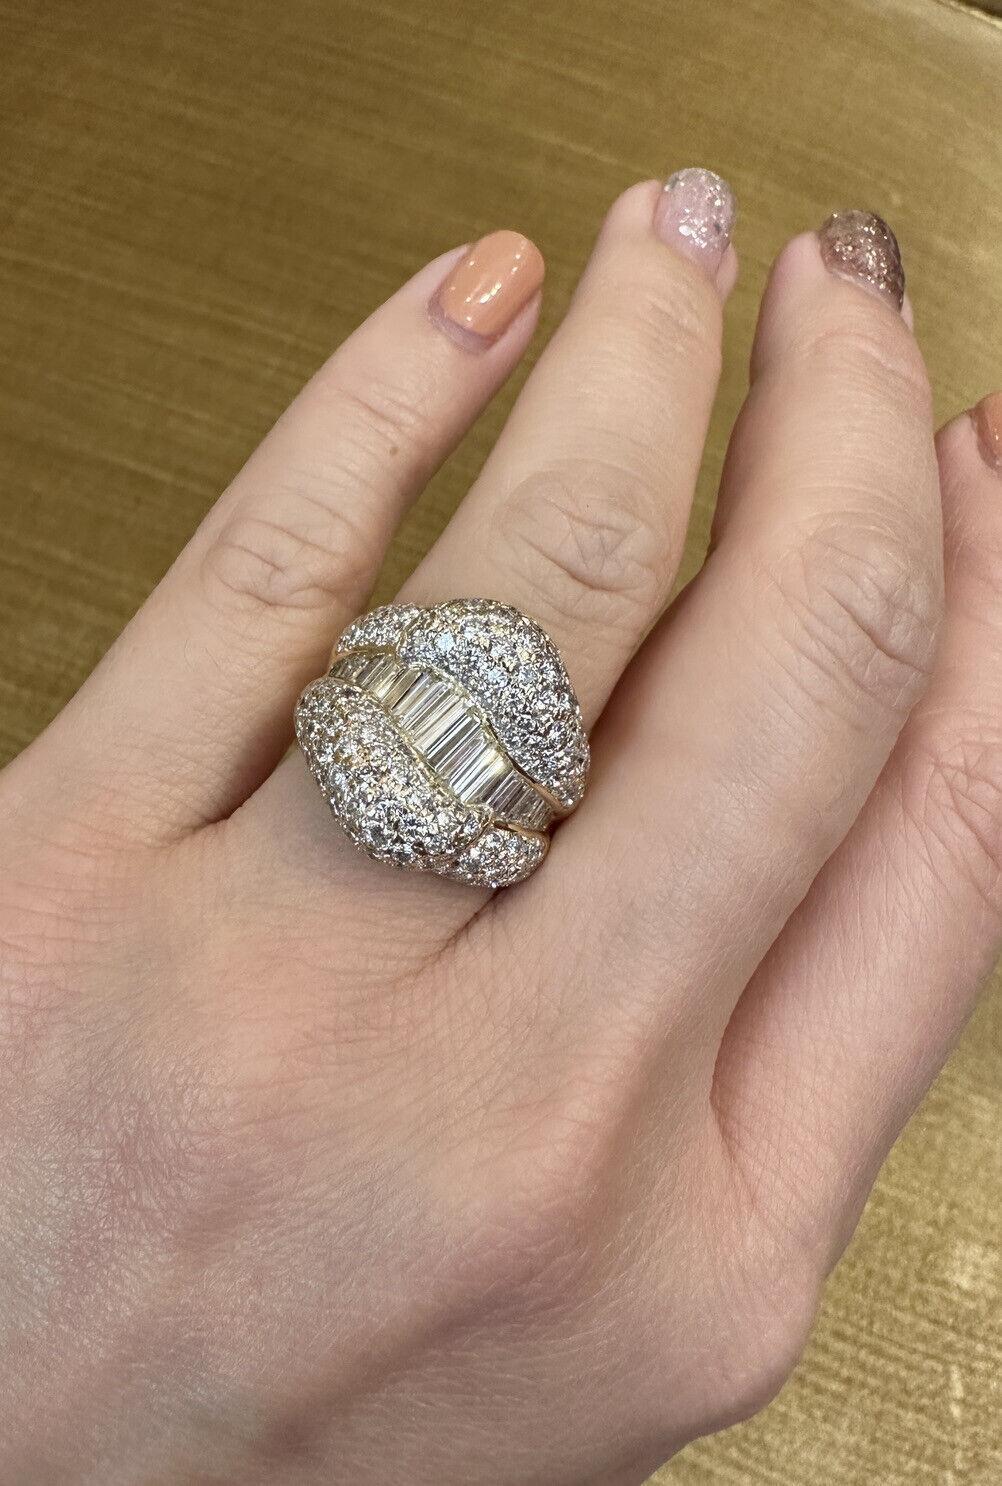 Pavé Round and Baguette Diamond Band Ring 3.45 carat total weight in Platinum and 18k Yellow Gold

Diamond Band Ring features Round Brilliant Diamonds pavé-set in two sections, with Baguette Diamonds channel-set in the center, all set in a Platinum